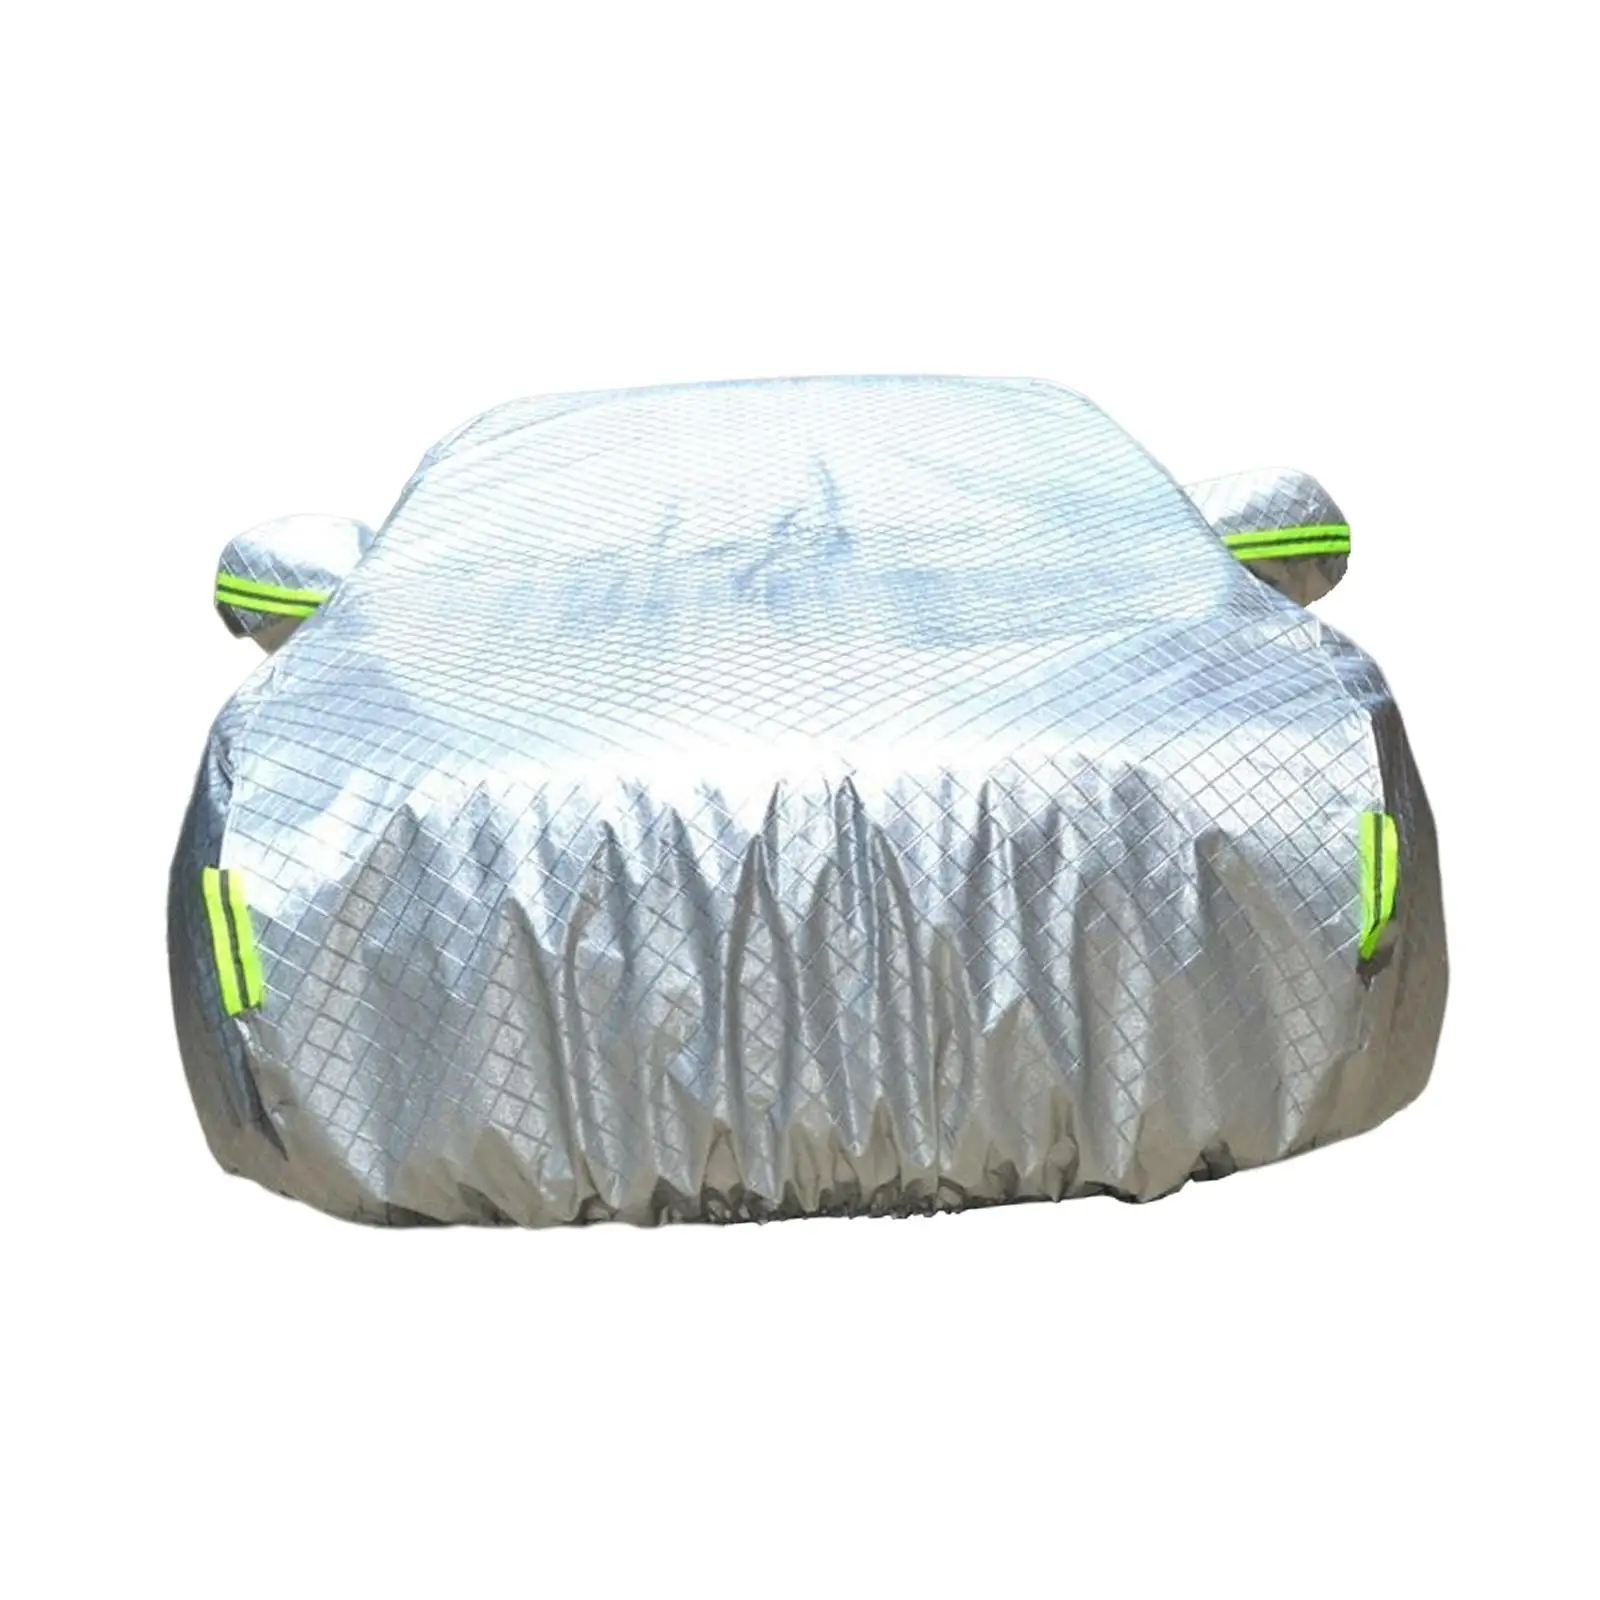 All Seasons Car Cover Water Resistant Exterior Accessories Rain Snow Dust Sun Shade Protector for Byd Atto 3 Yuan Plus